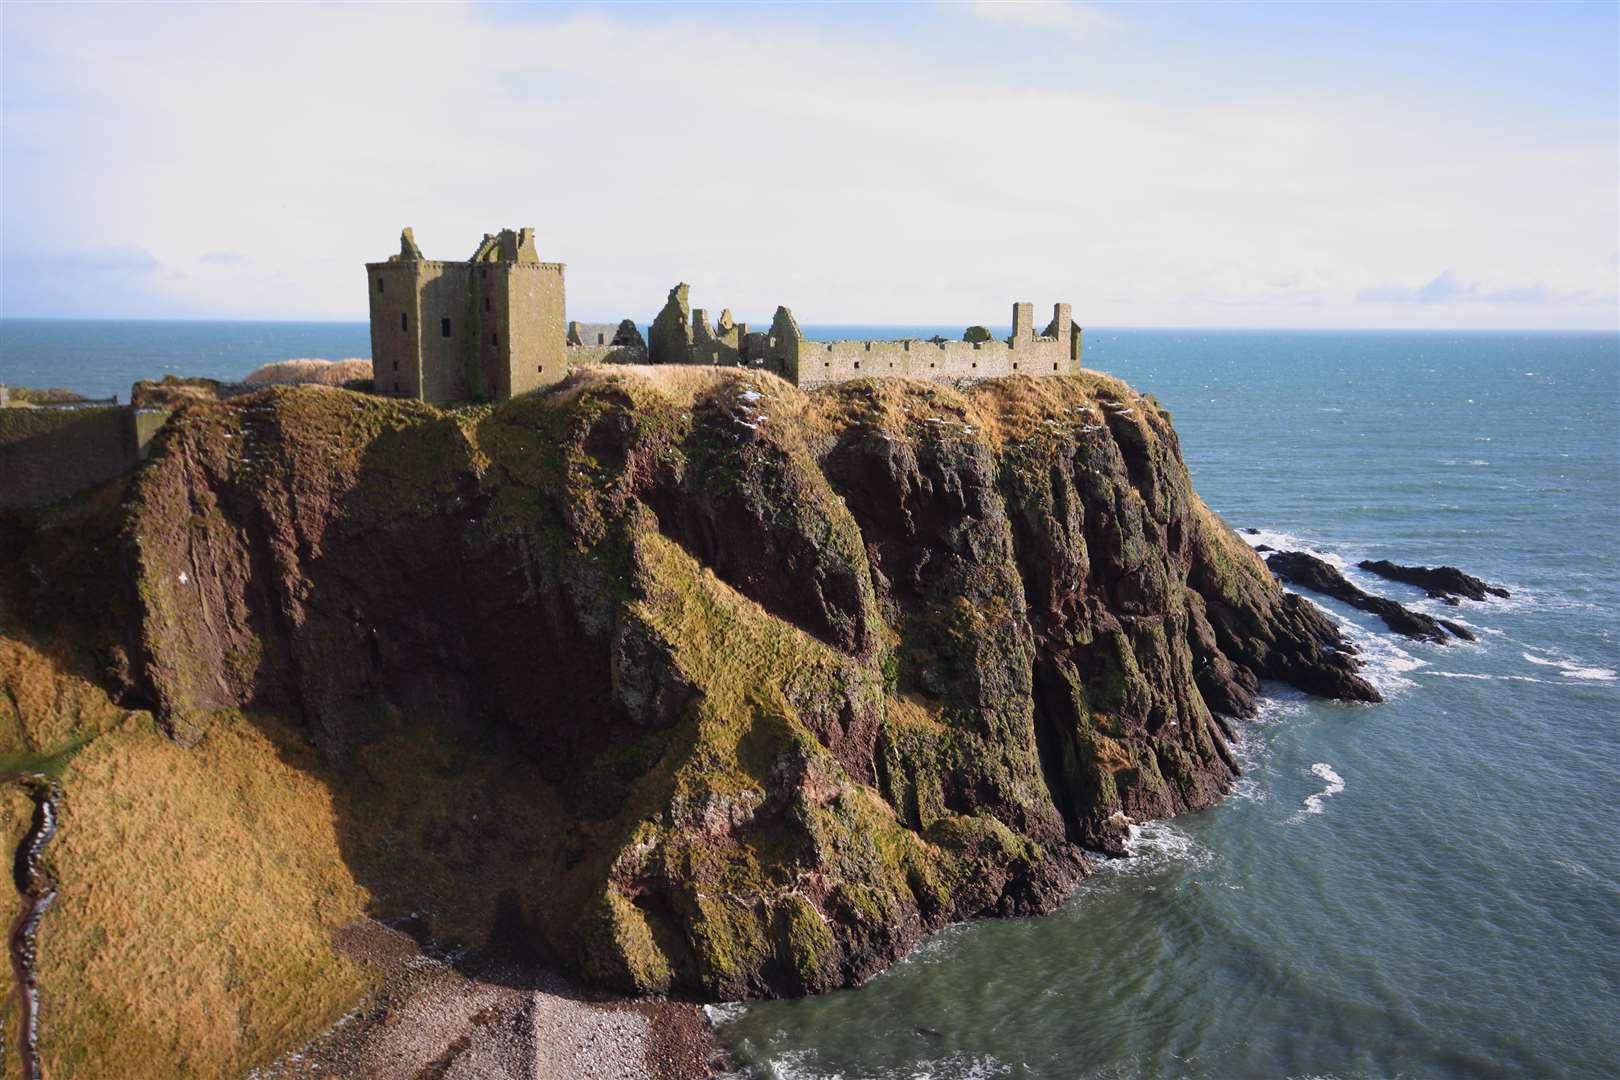 Dunnottar Castle with snow on the ground, Scotland